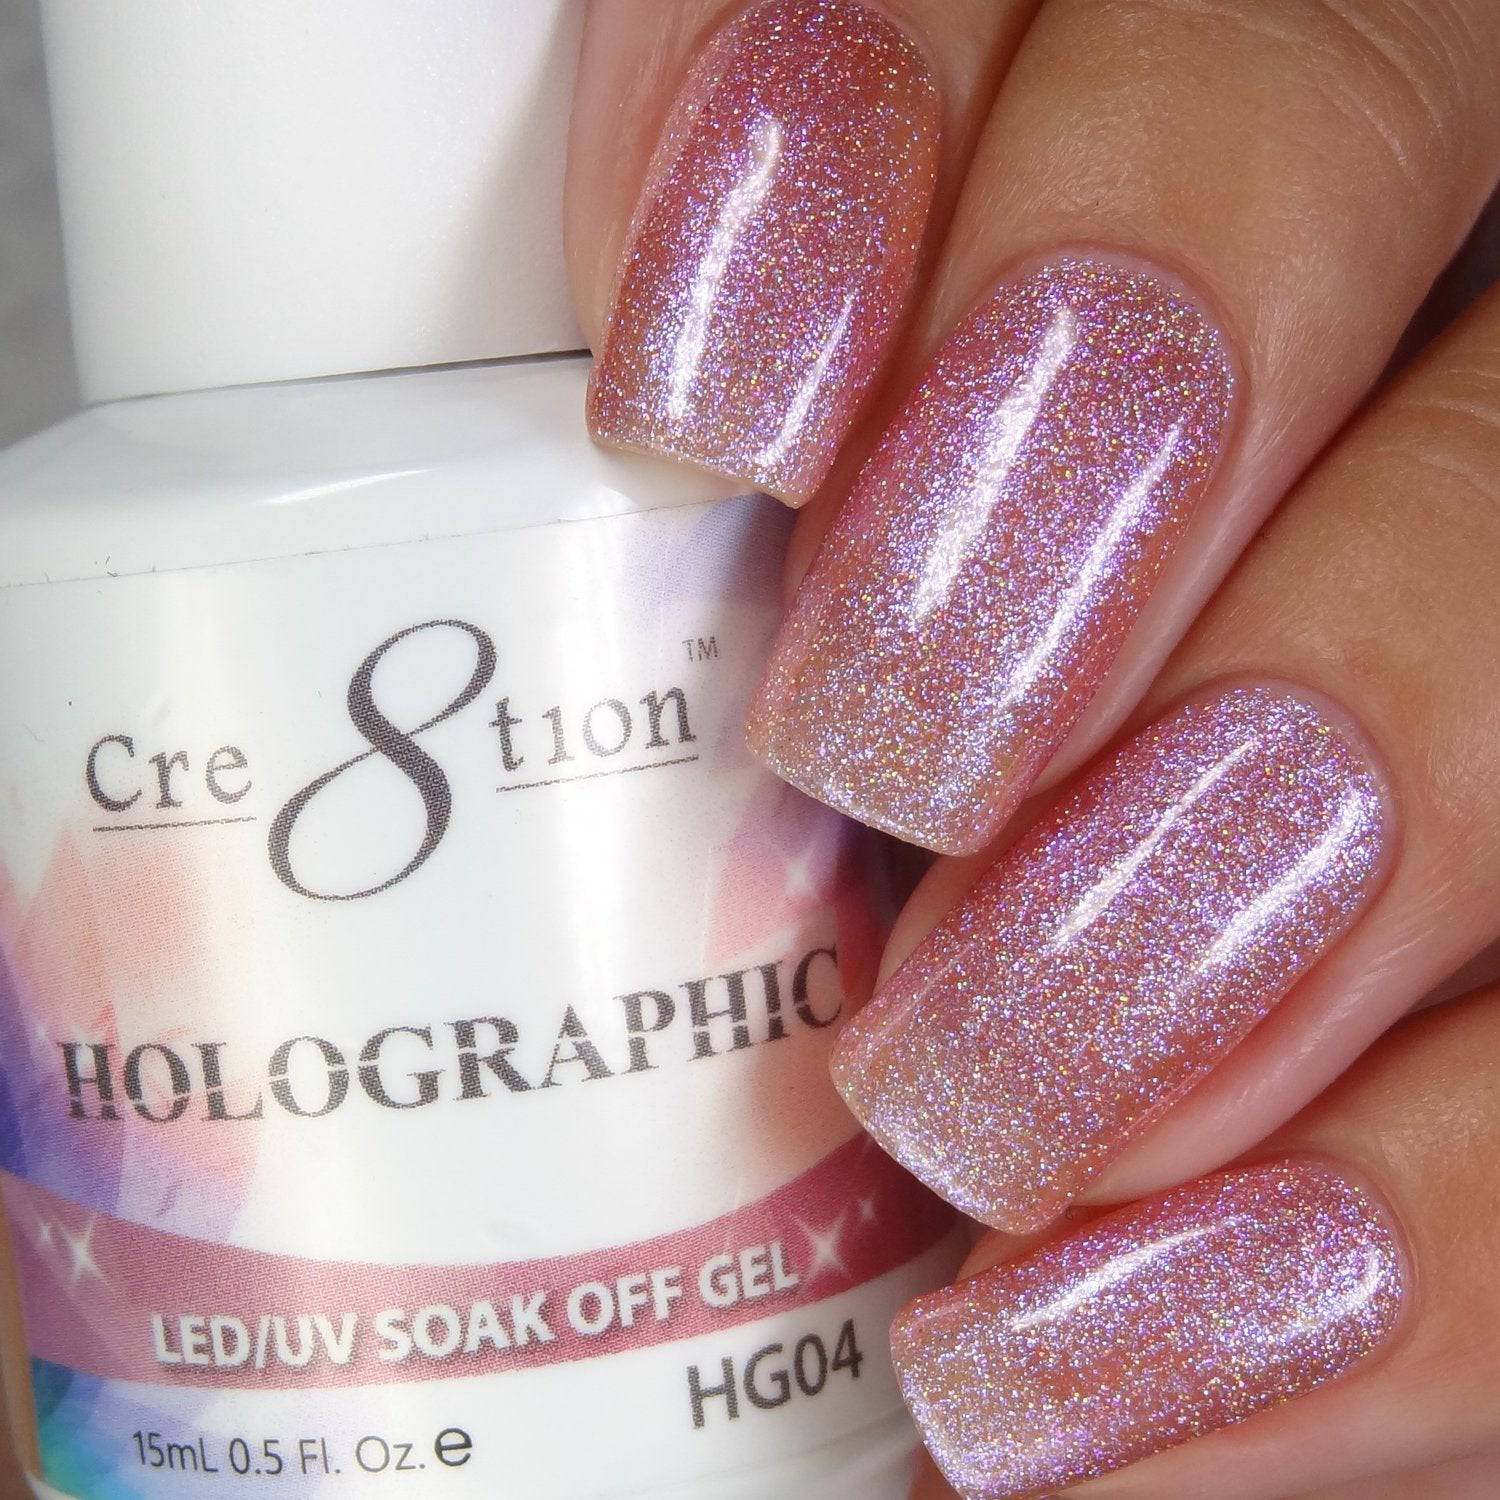 Cre8tion Holographic Gel - HG04 - Universal Nail Supplies